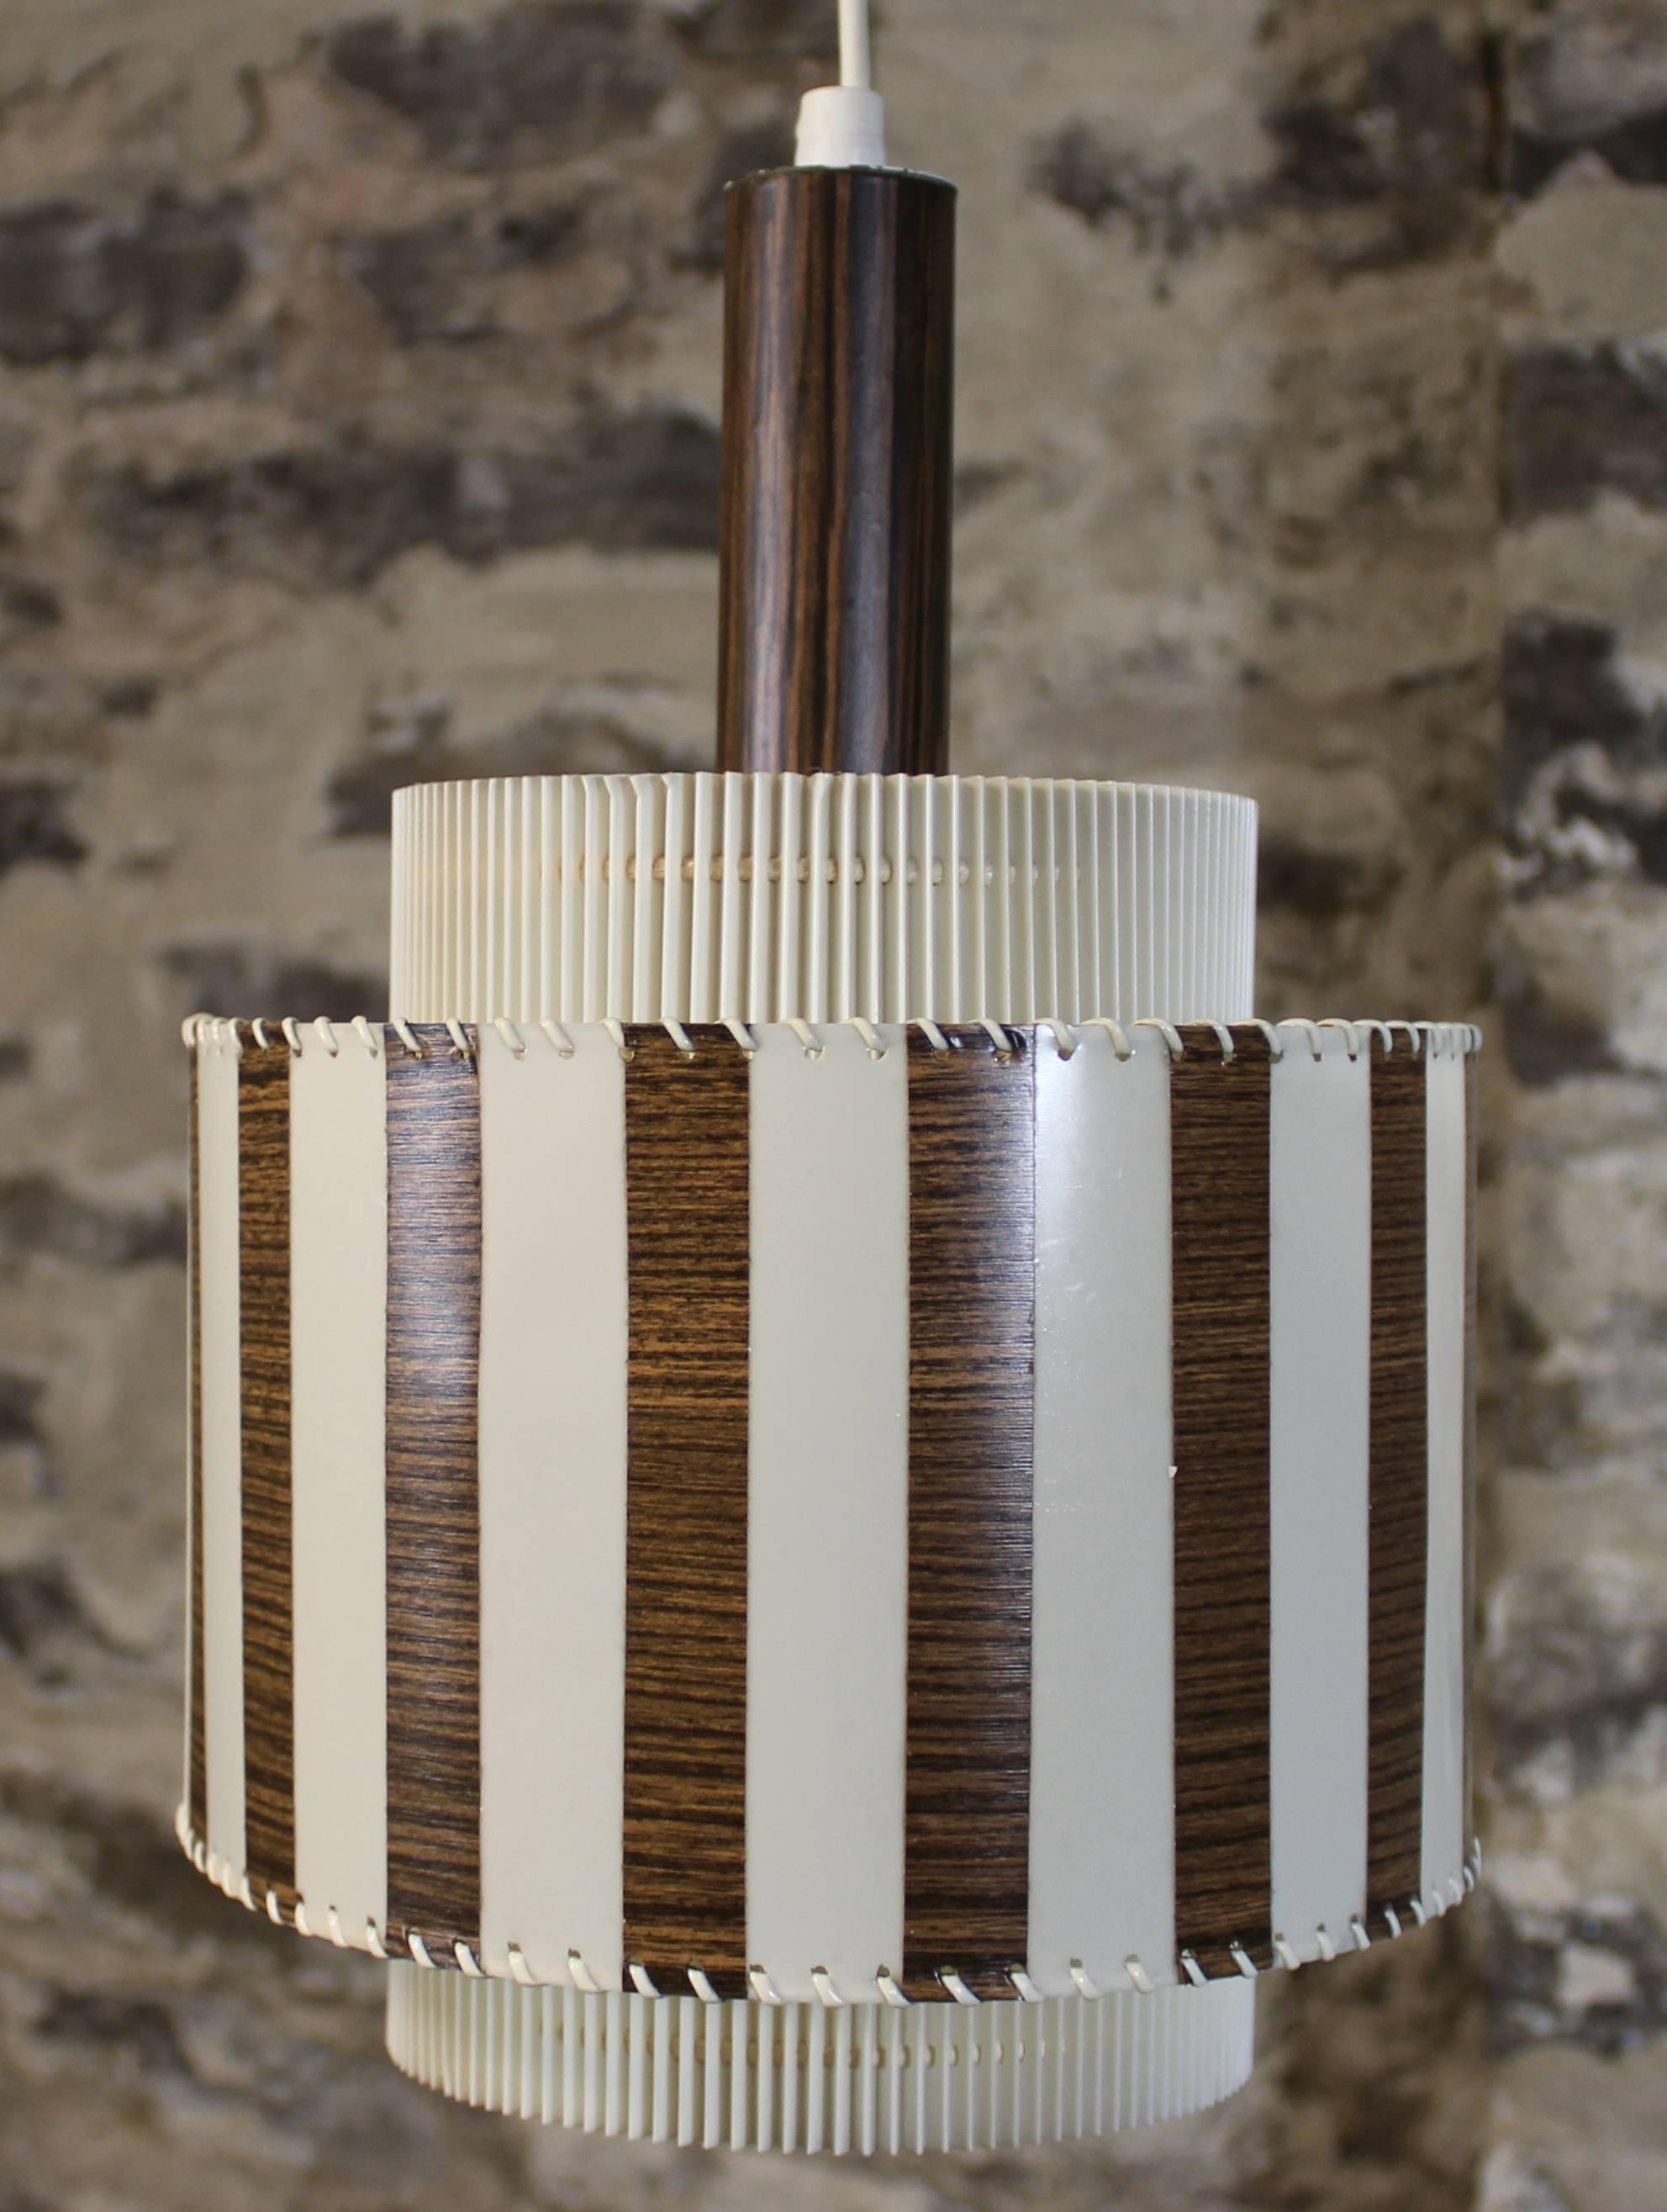 Mid-Century Modern light fixture or pendant.

Unique design done in accordion pleated plastic with white and wood effect stripes.

Free shipping within the United States and Canada.